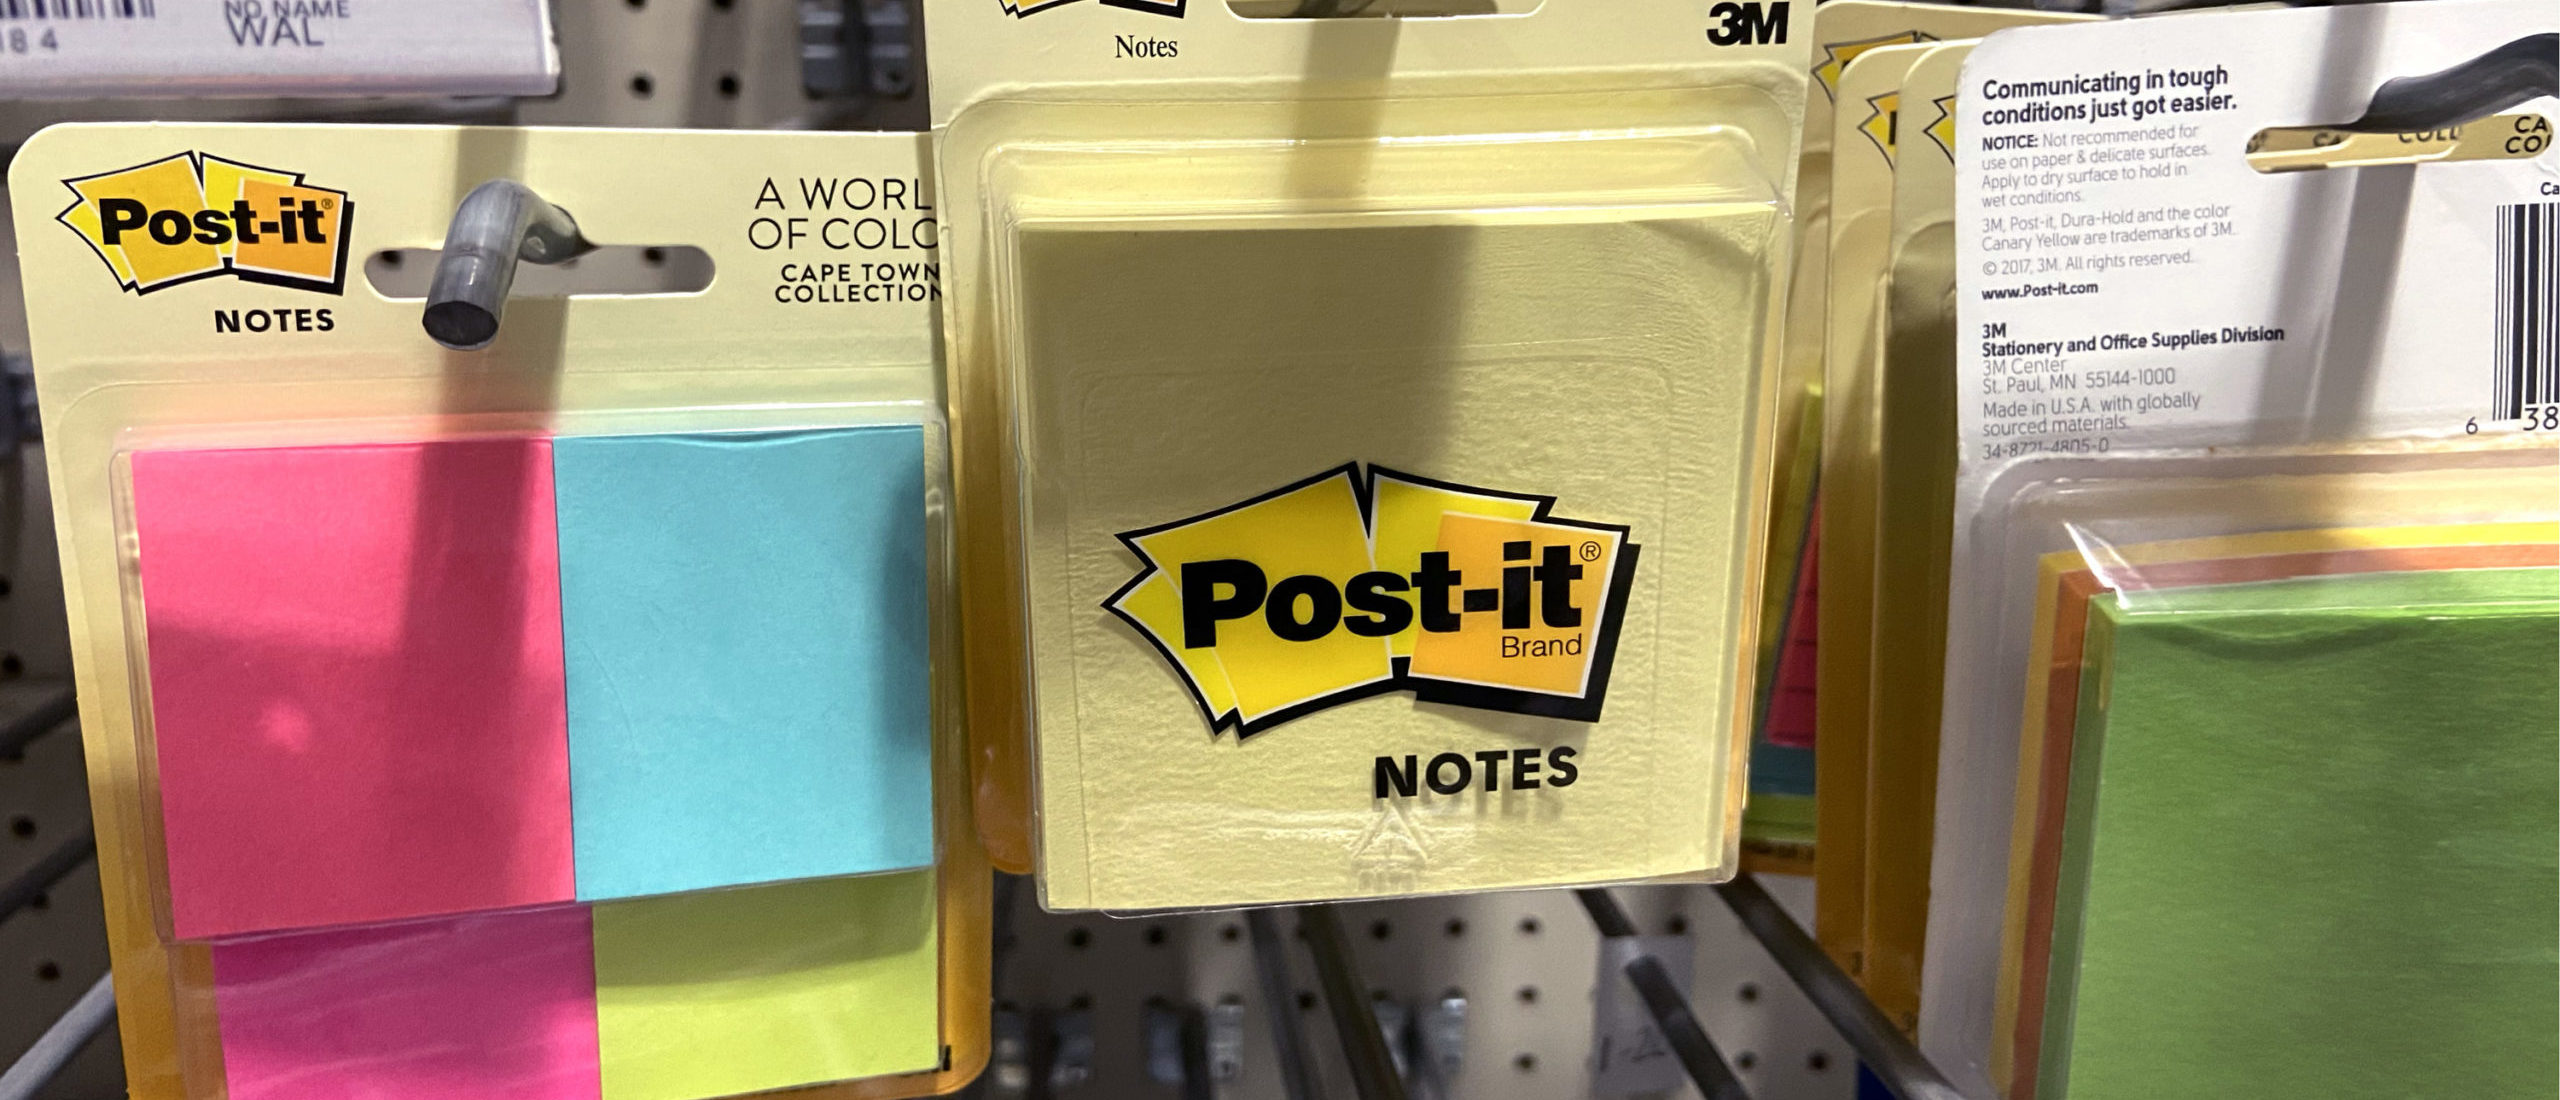 CHICAGO, ILLINOIS - JANUARY 28: Post-it notes manufactured by 3M are offered for sale at a big box retailer on January 28, 2020 in Chicago, Illinois. 3M announced it would be cutting 1,500 jobs as well as making other changes at the company after reporting fourth-quarter earnings that plunged 27%. (Photo by Scott Olson/Getty Images)